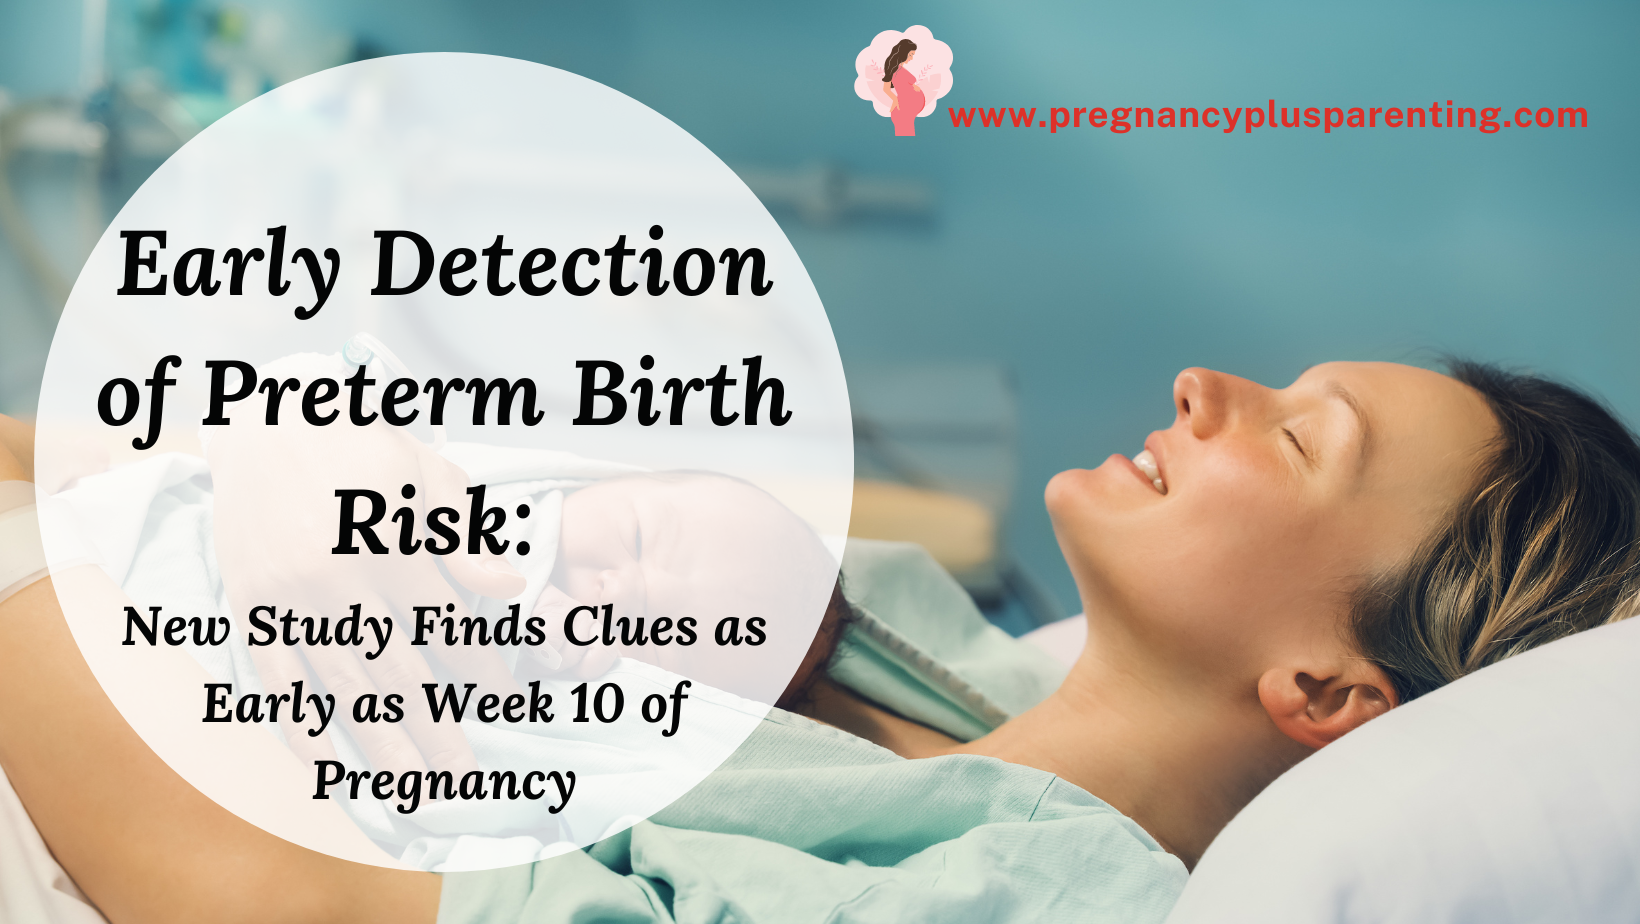 Early Detection of Preterm Birth Risk: New Study Finds Clues as Early as Week 10 of Pregnancy